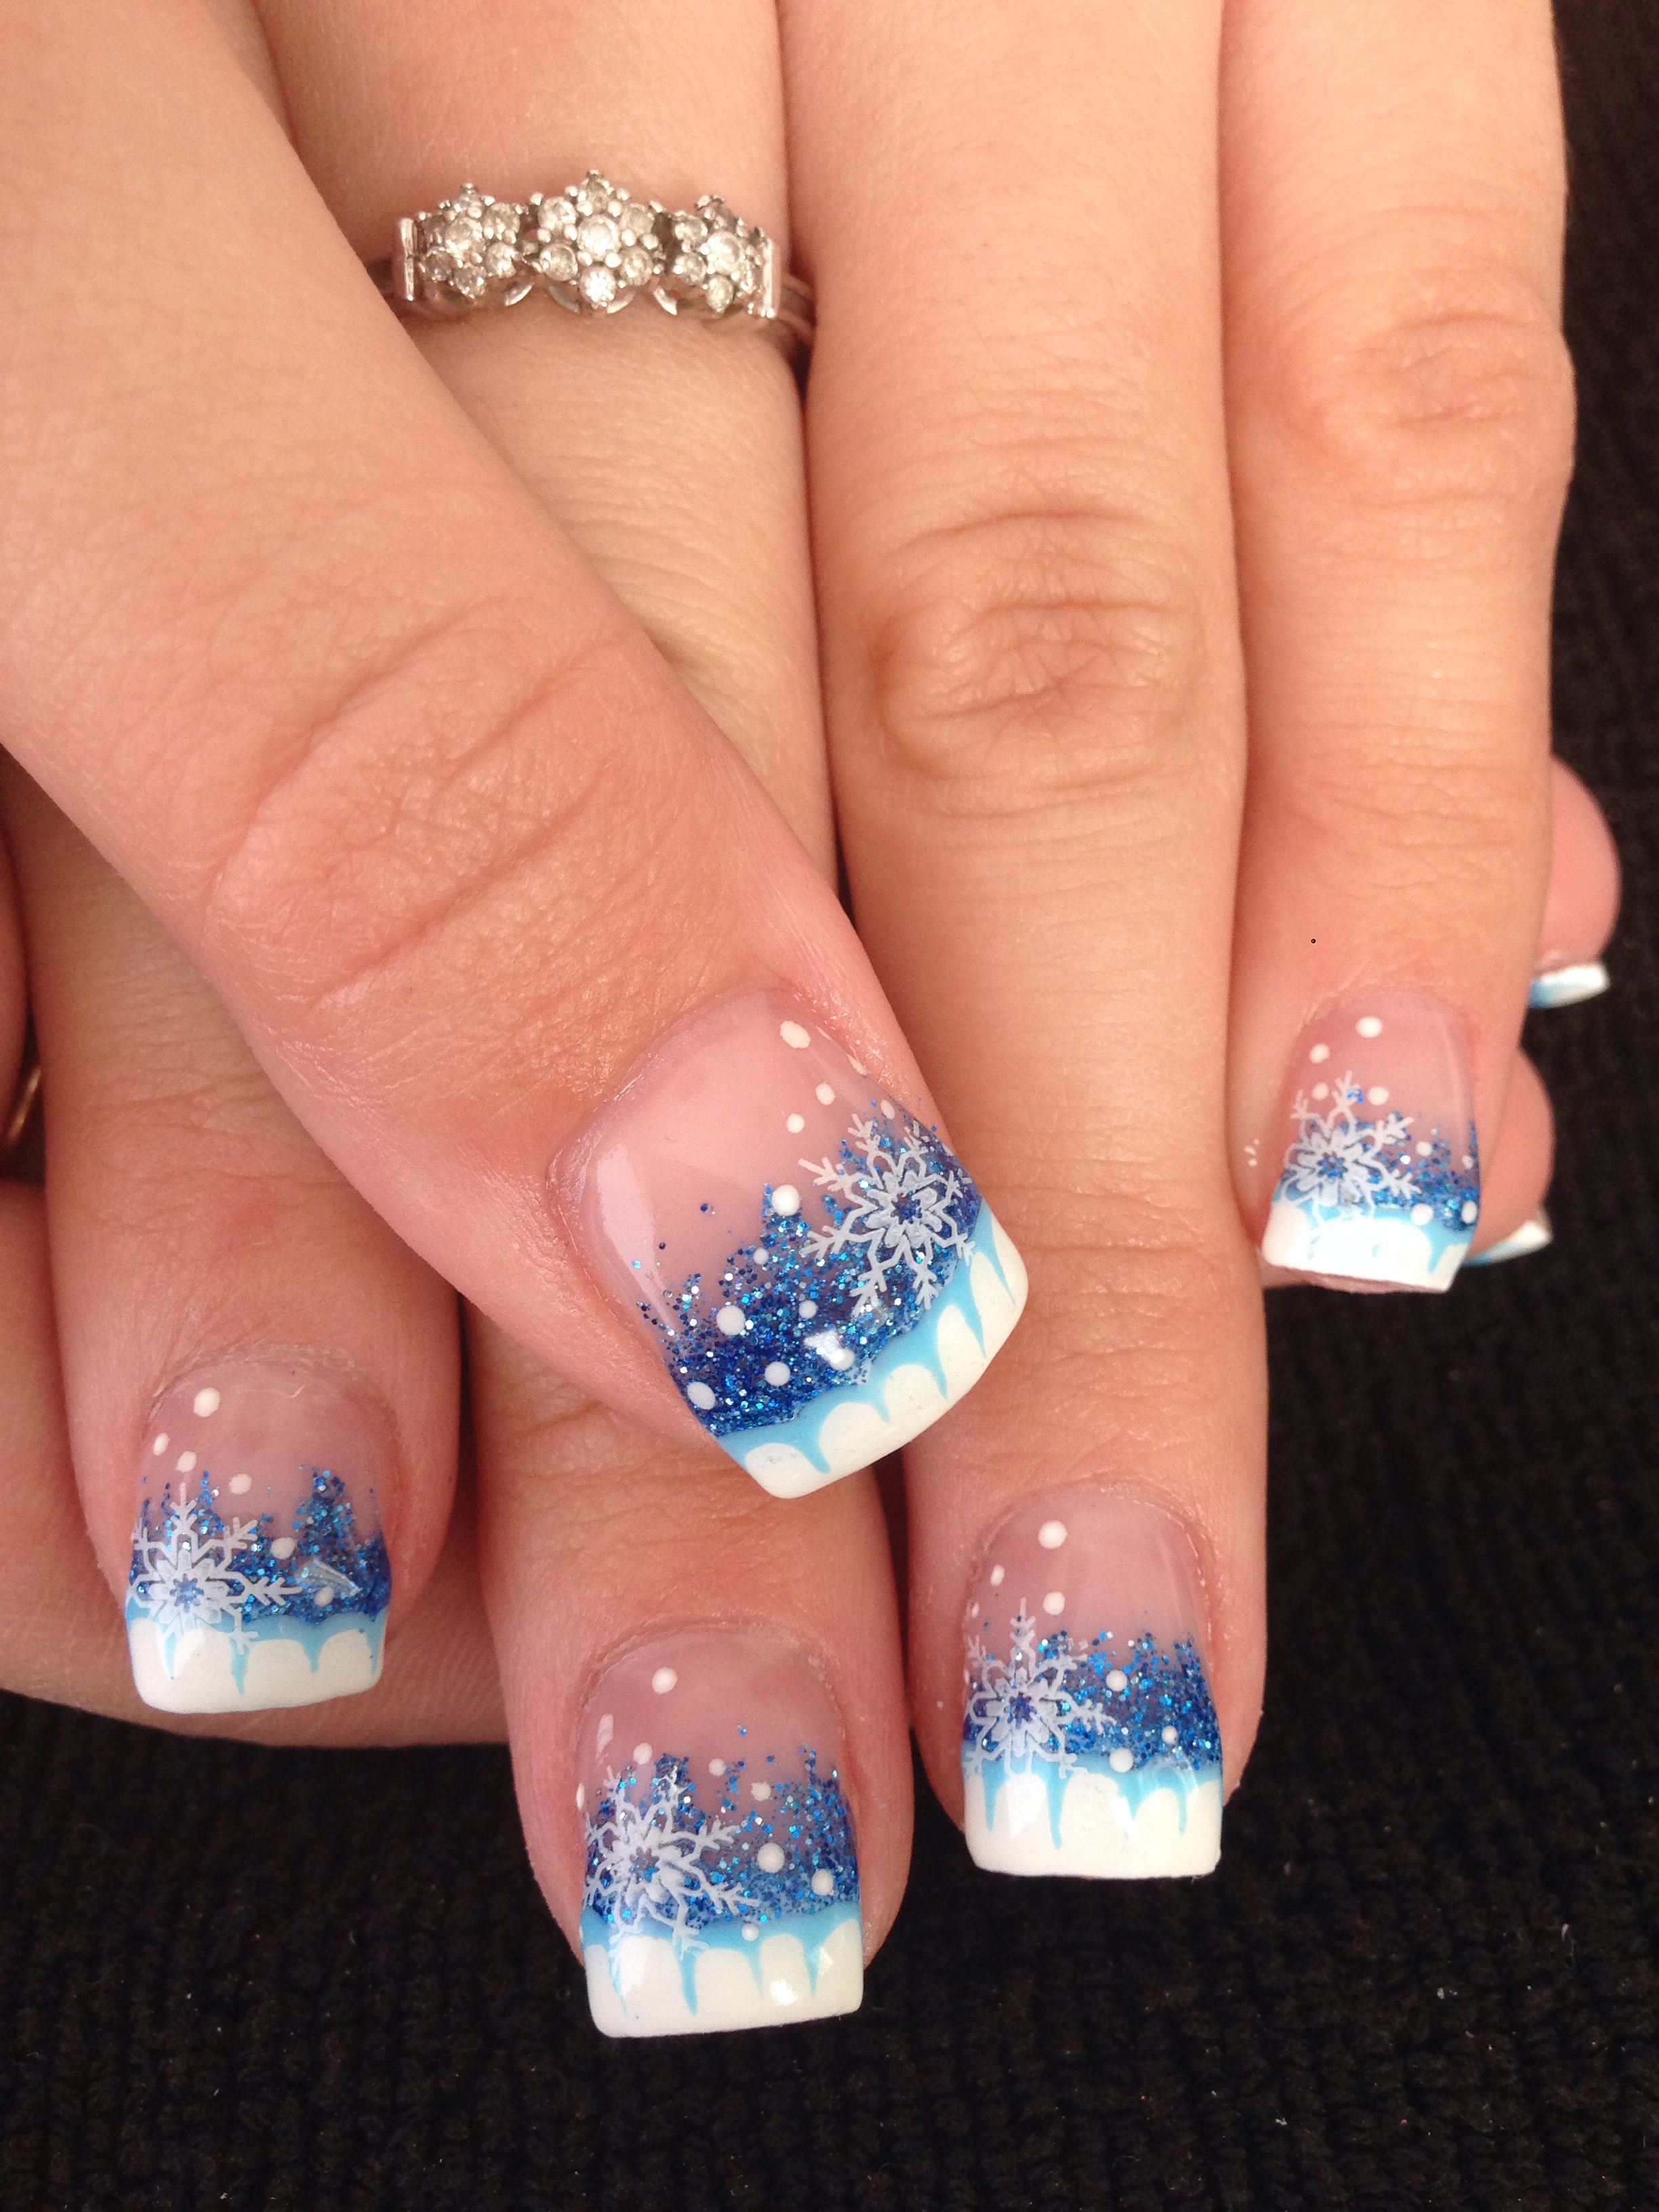 Winter gel nails with blue glitter and snowflake nail art design